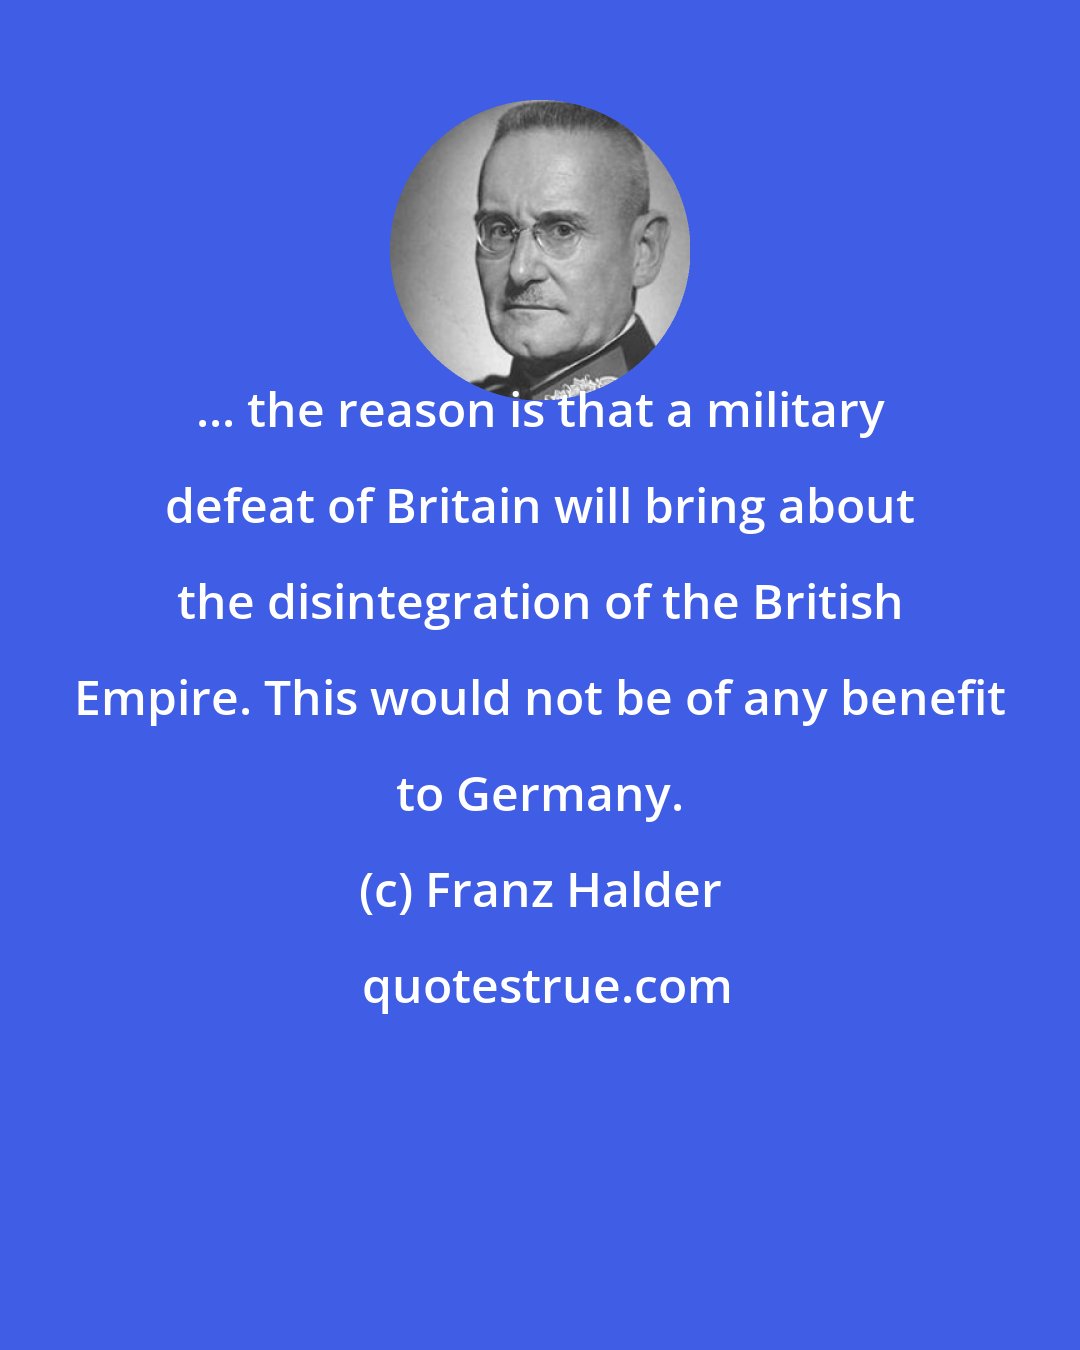 Franz Halder: ... the reason is that a military defeat of Britain will bring about the disintegration of the British Empire. This would not be of any benefit to Germany.